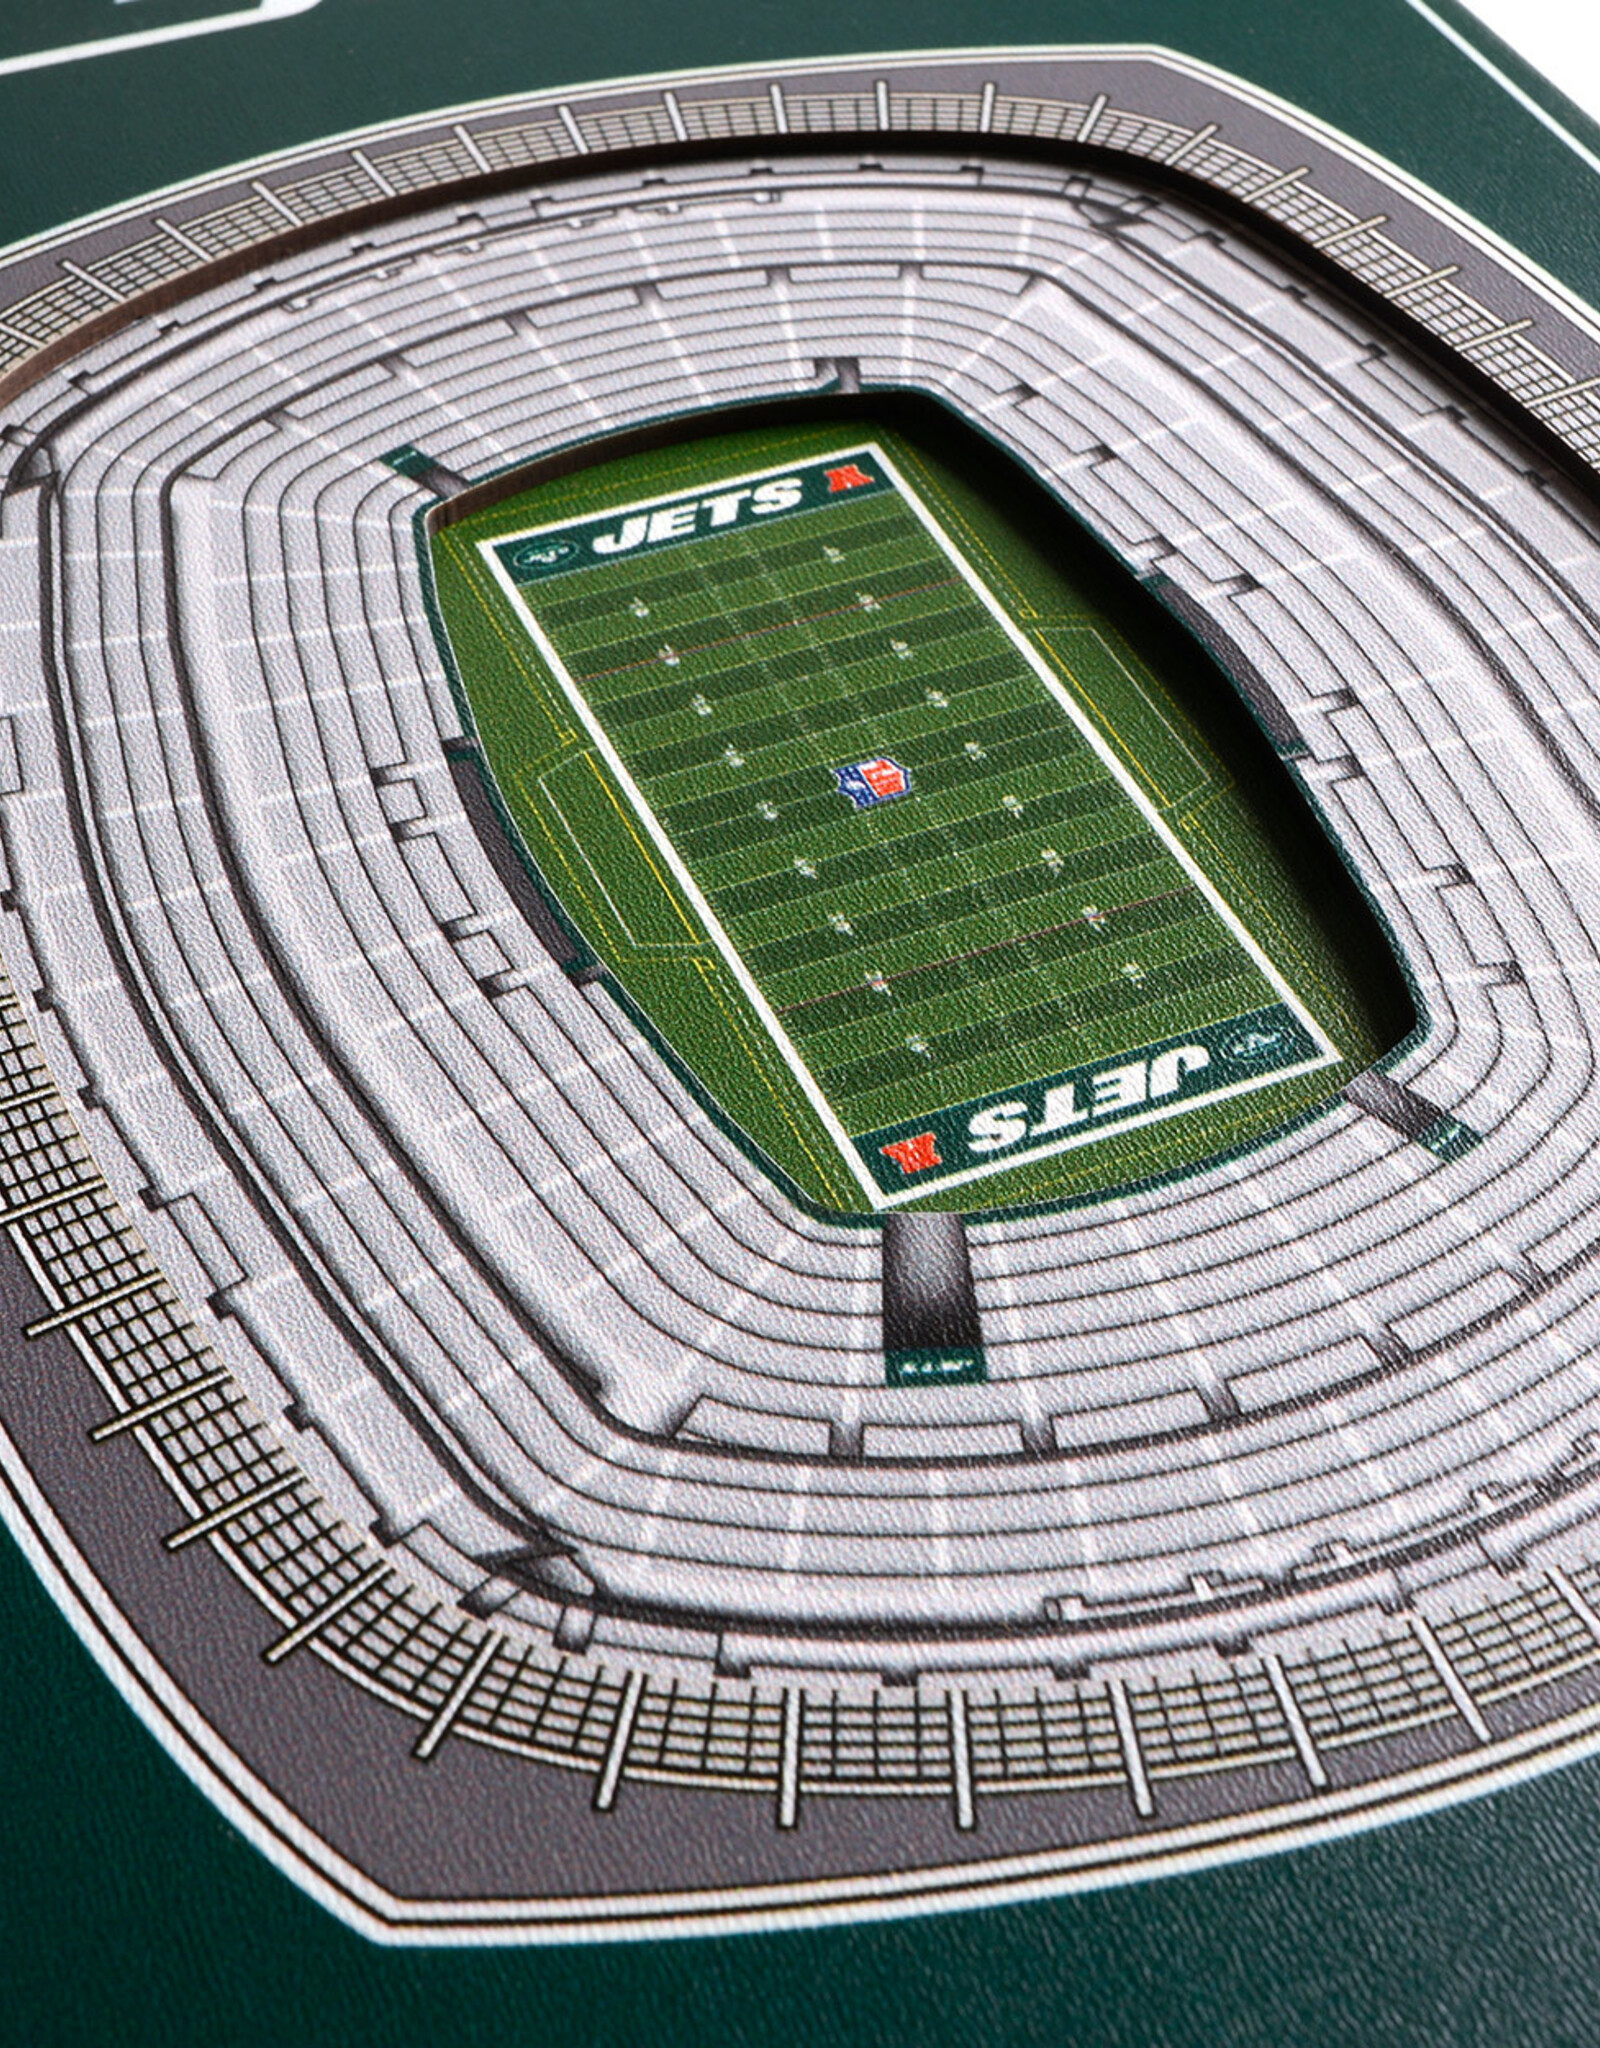 YOU THE FAN New York Jets 3D StadiumView 8x32 Banner